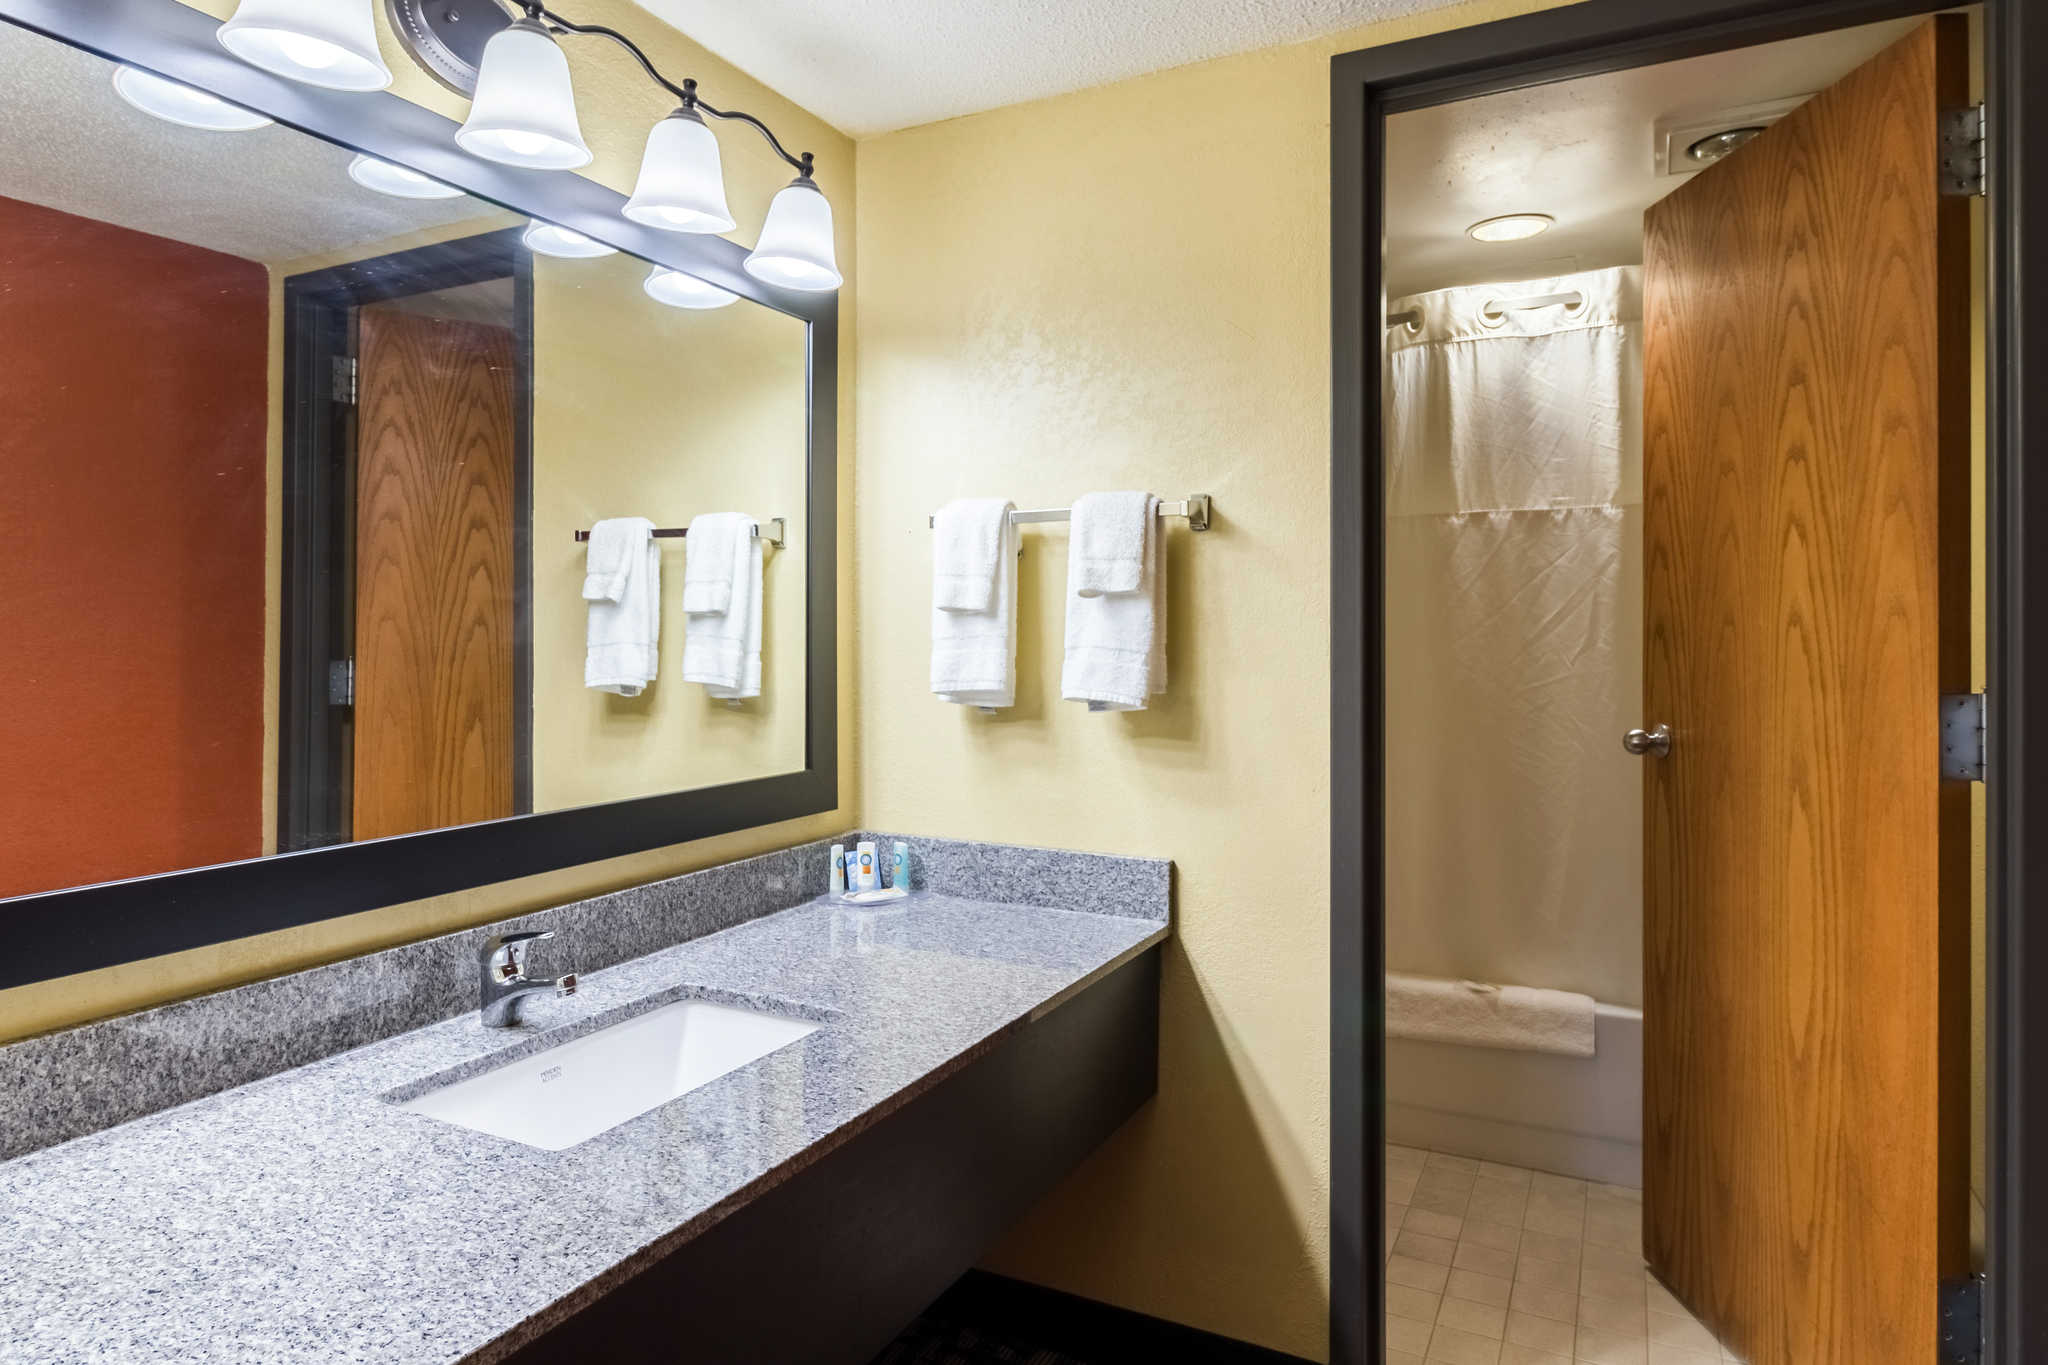 Quality Inn & Suites Mayo Clinic Area